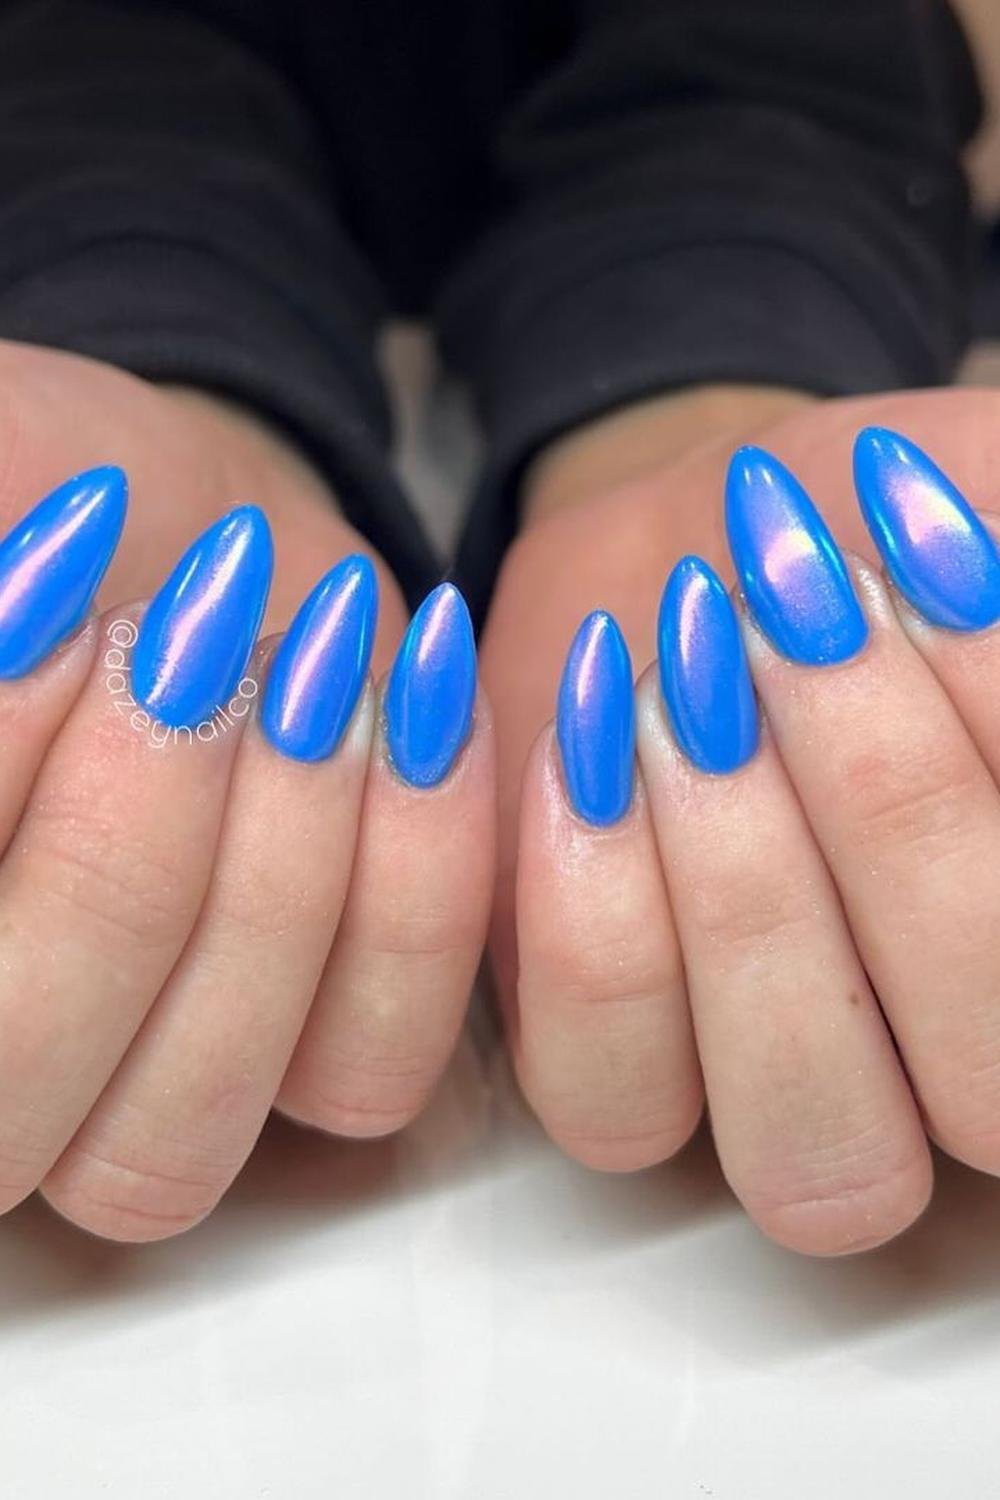 2 - Picture of Blue Chrome Nails